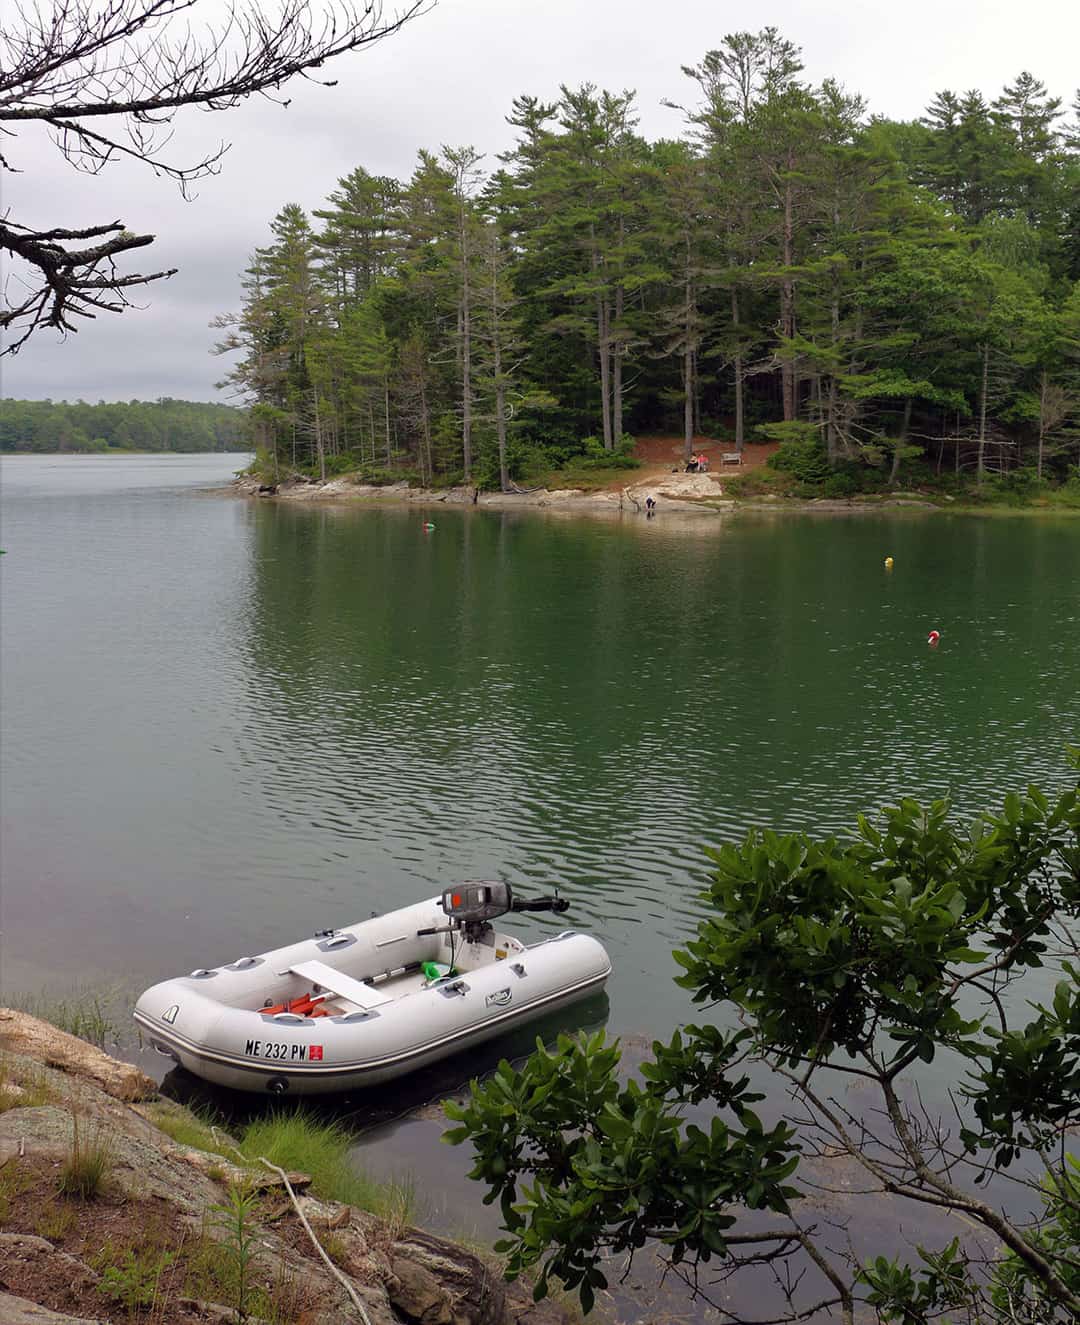 Inflatable dinghy tied to near shore; opposite shore has rocky ledge and tall firs.